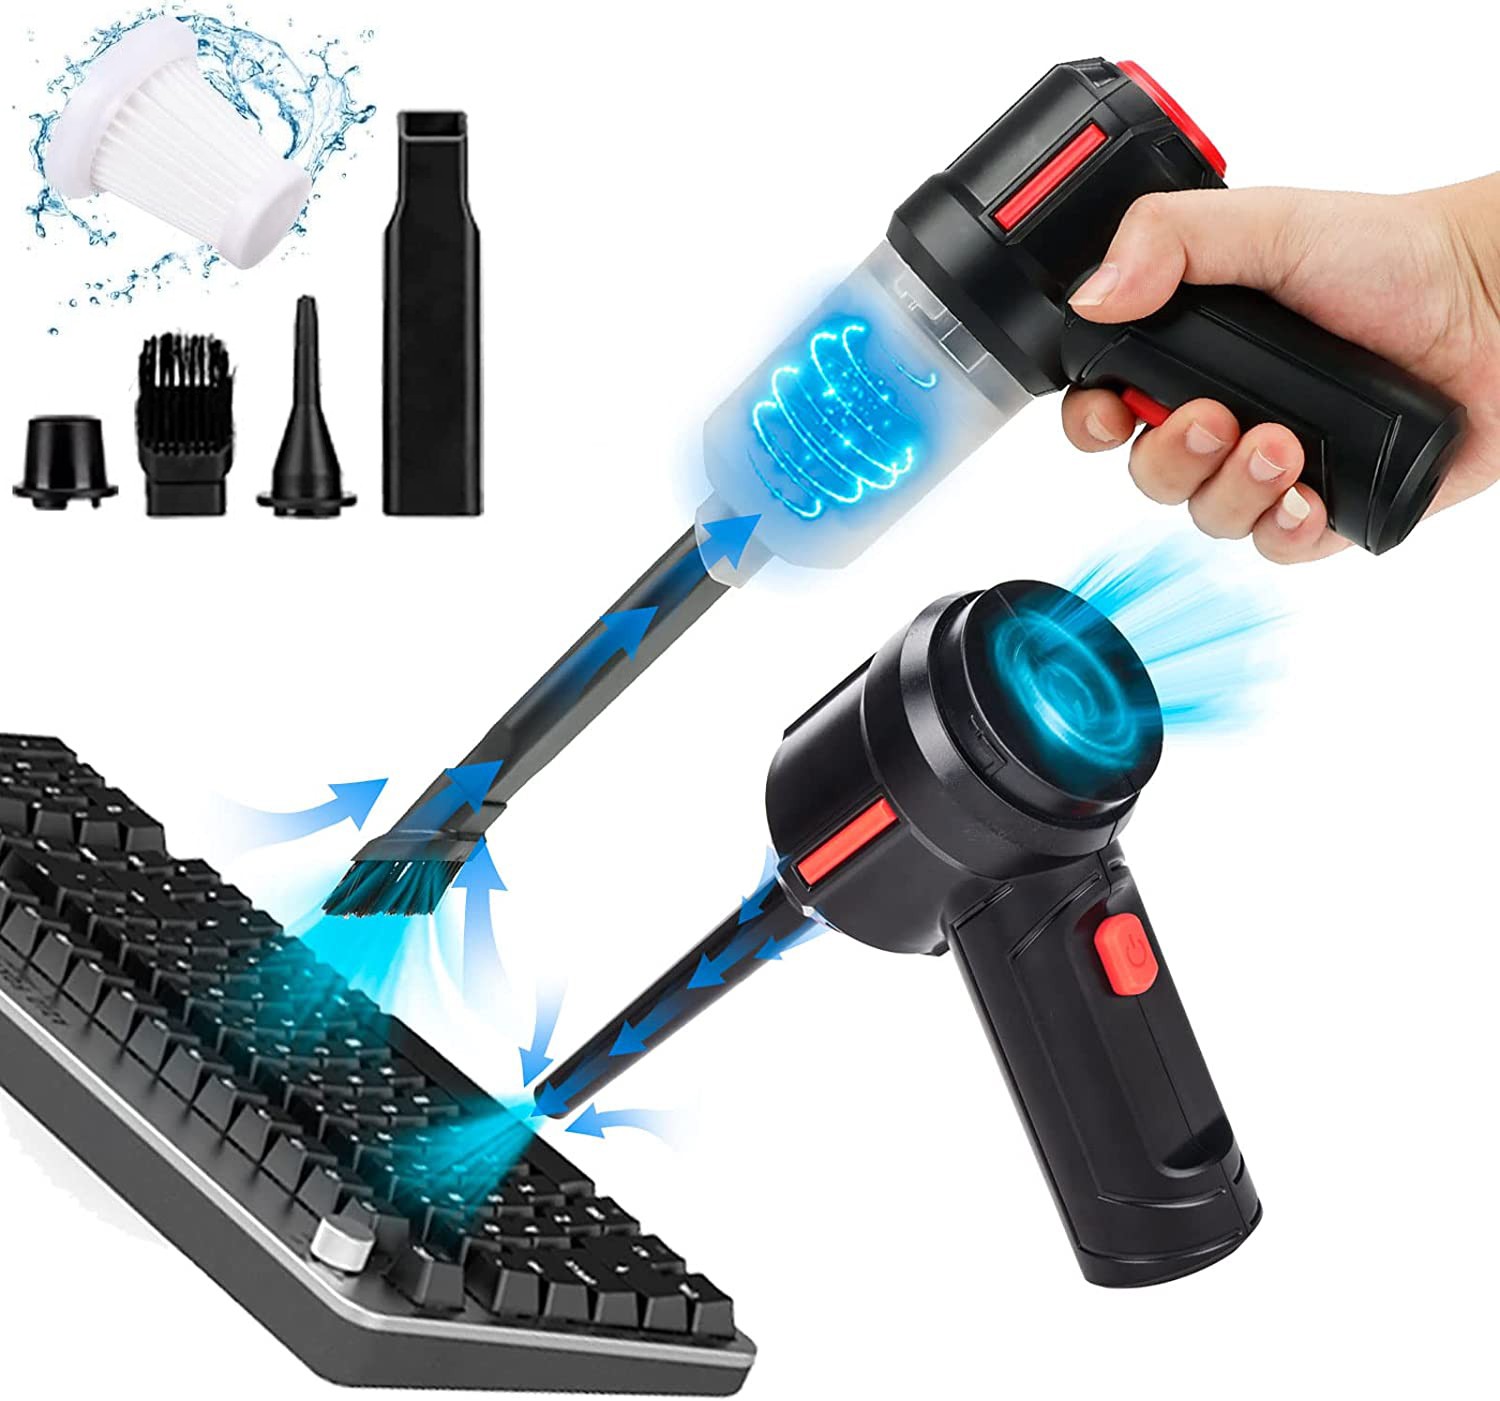 Keyboard Cleaner Kit 3-in-1 Computer Vacuum Cleaner Cordless Compressed Air Duster Rechargeable Car Hoover Handheld